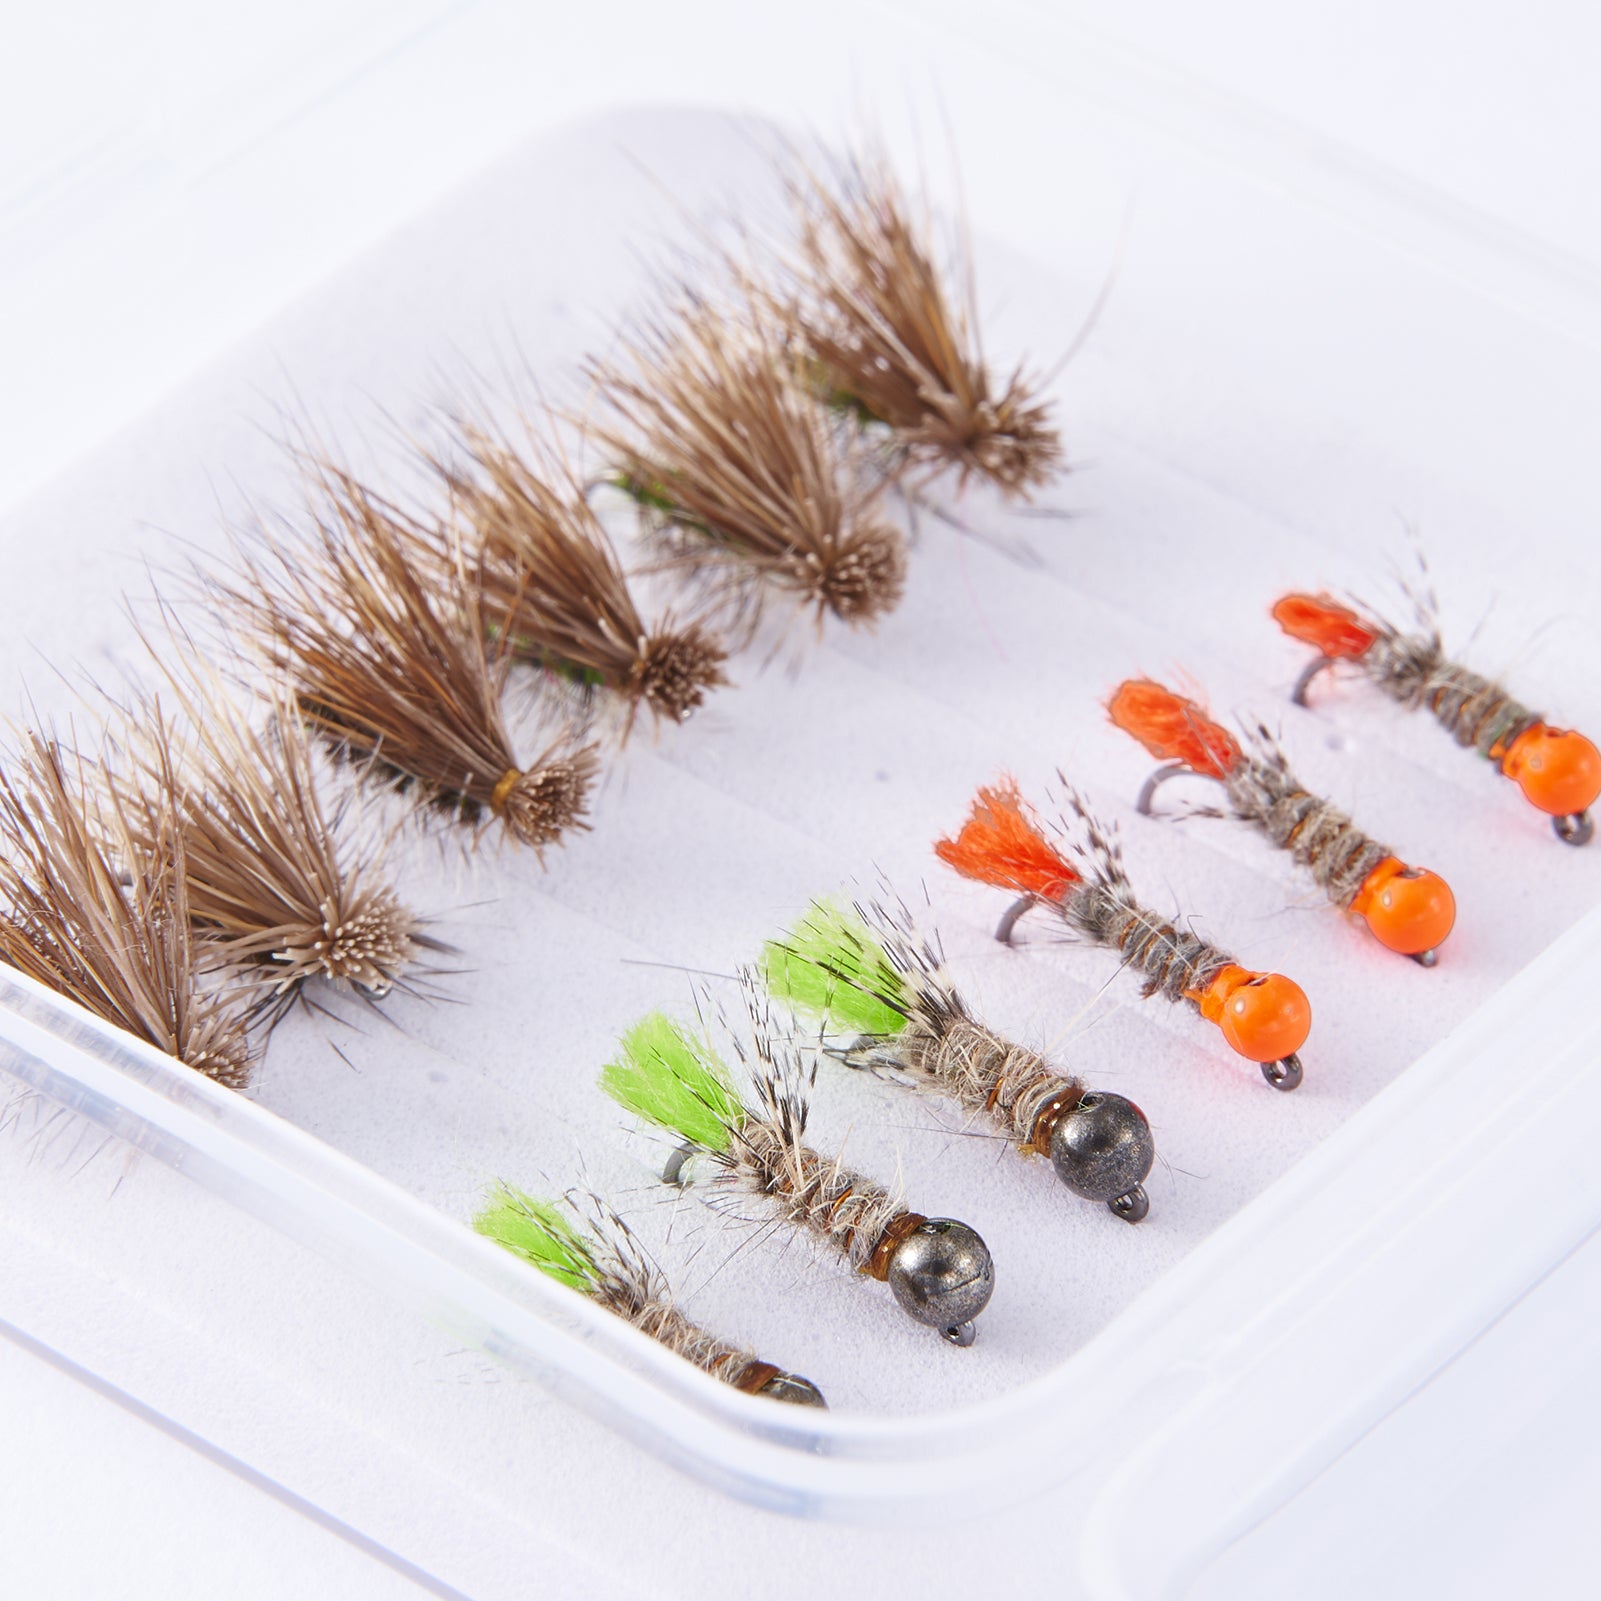 Fly Fishing Flies Barbless Fly Hooks 6pcs Include Flies Nymphs Streamers  for Trout Salmon Steelhead Fishing - 14 